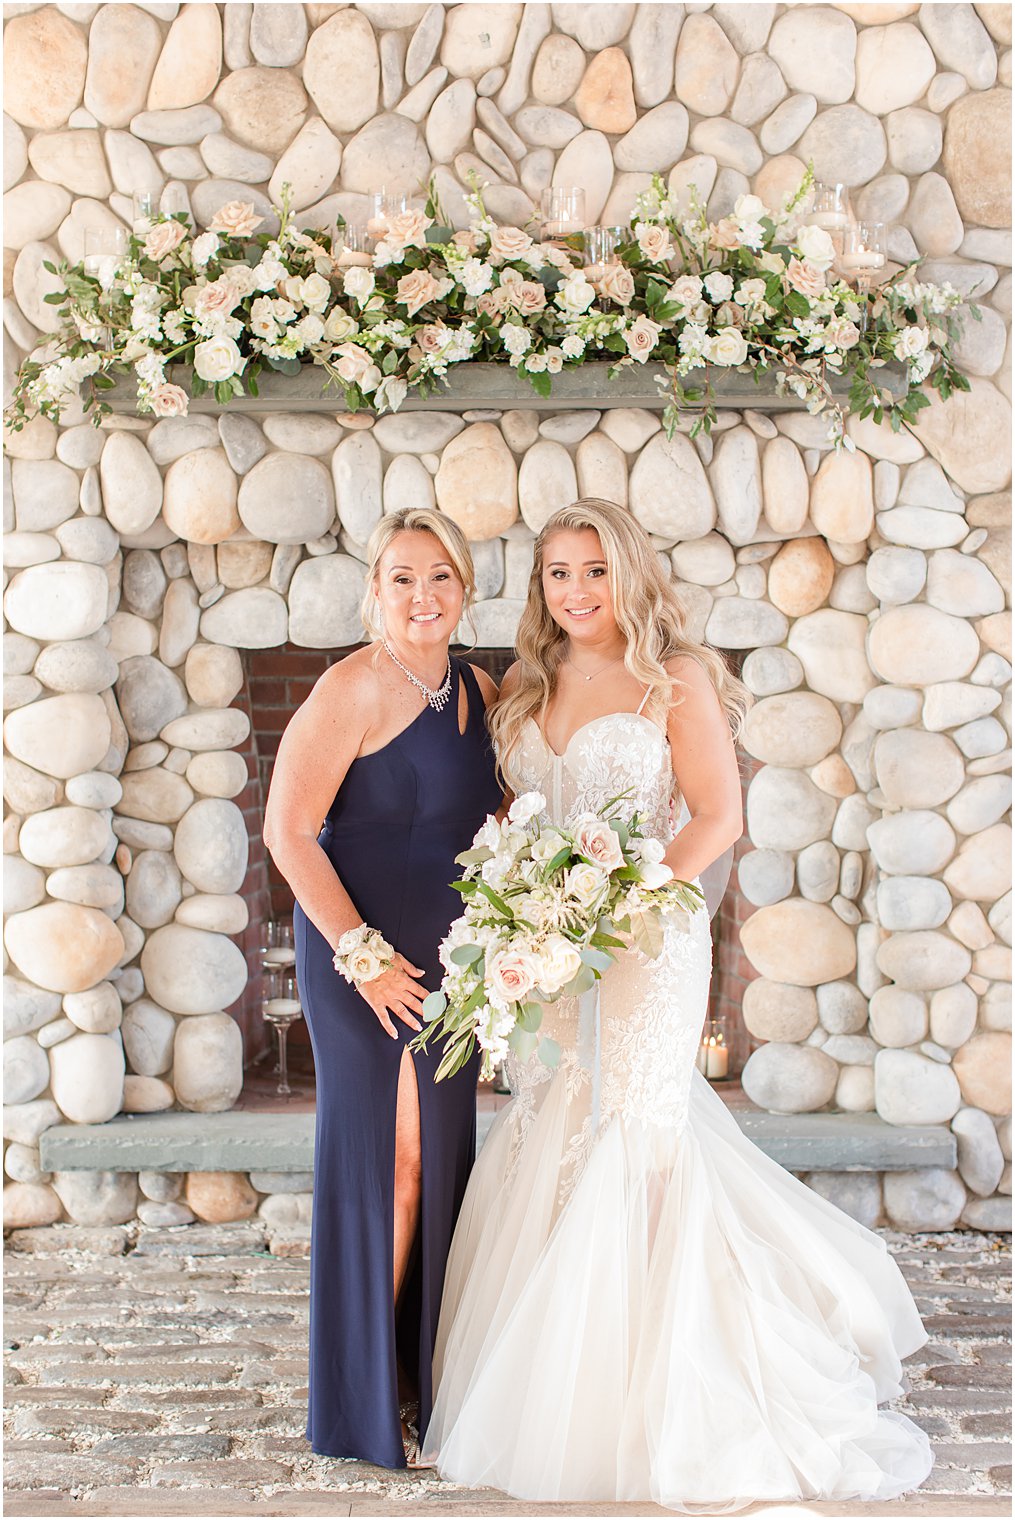 Bride with her mom on wedding day by stone fireplace